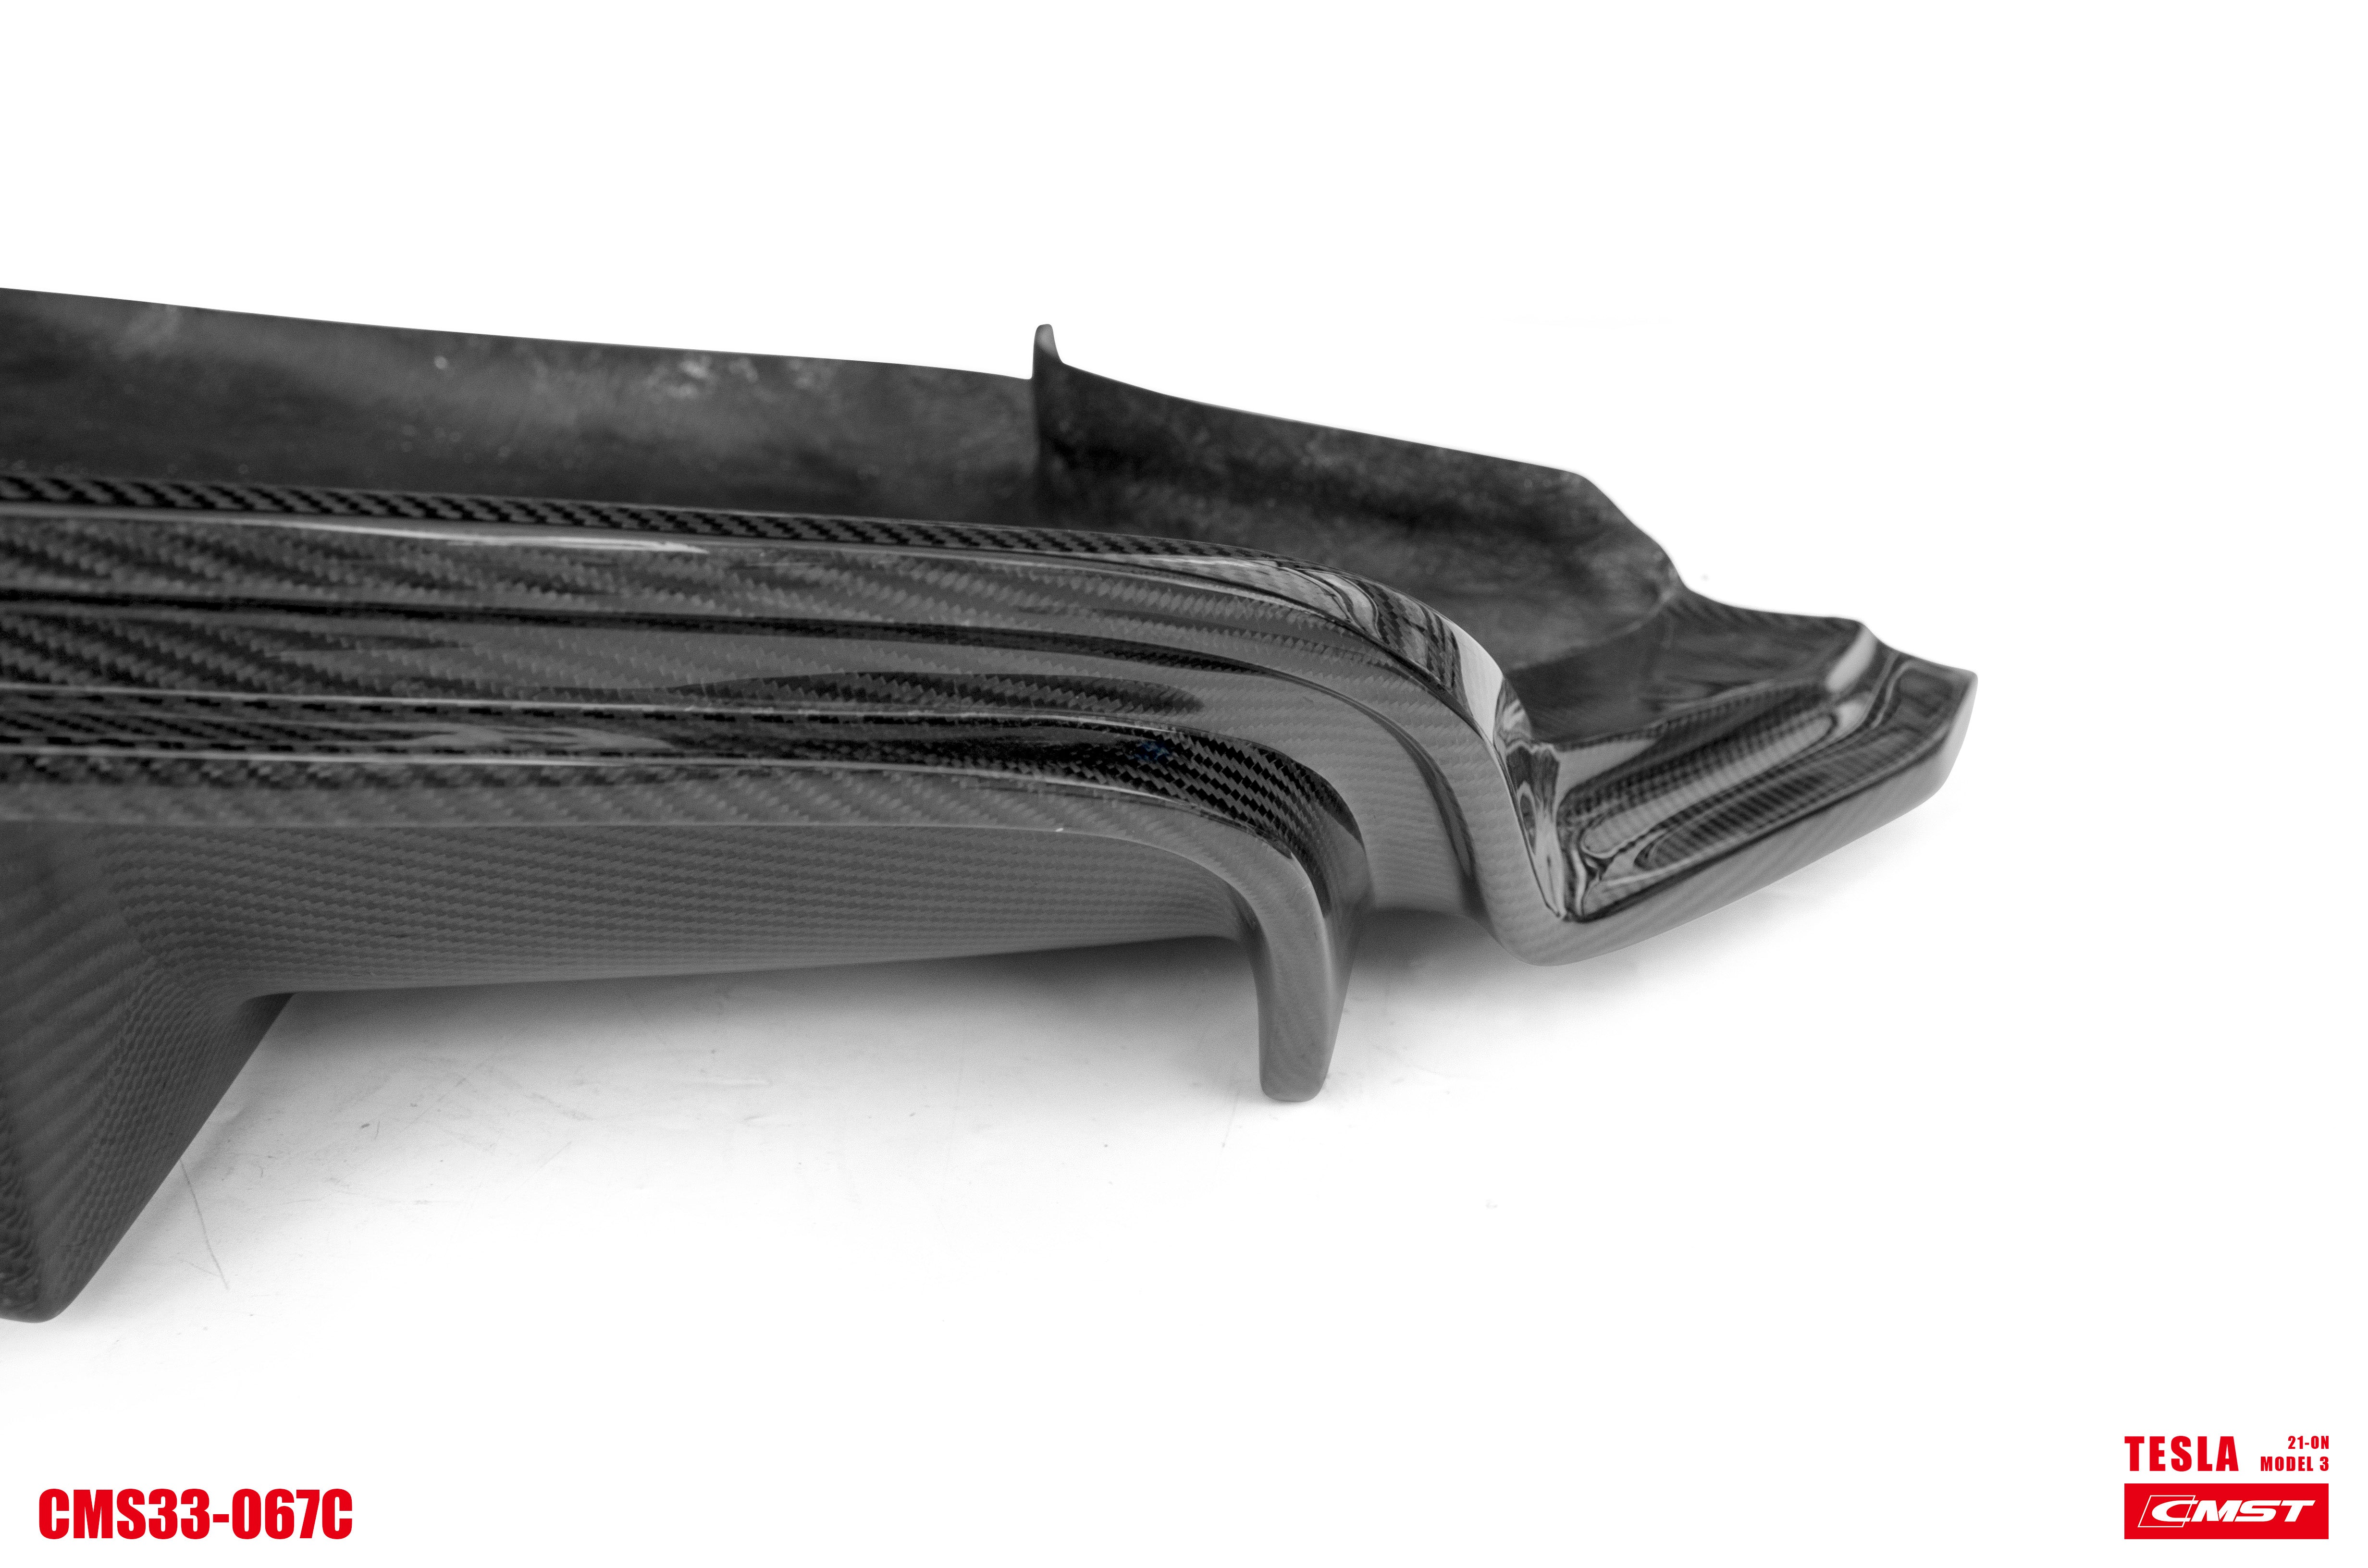 New Release!! CMST Tesla Model 3 Carbon Fiber Rear Diffuser Ver.4 with tow hook access